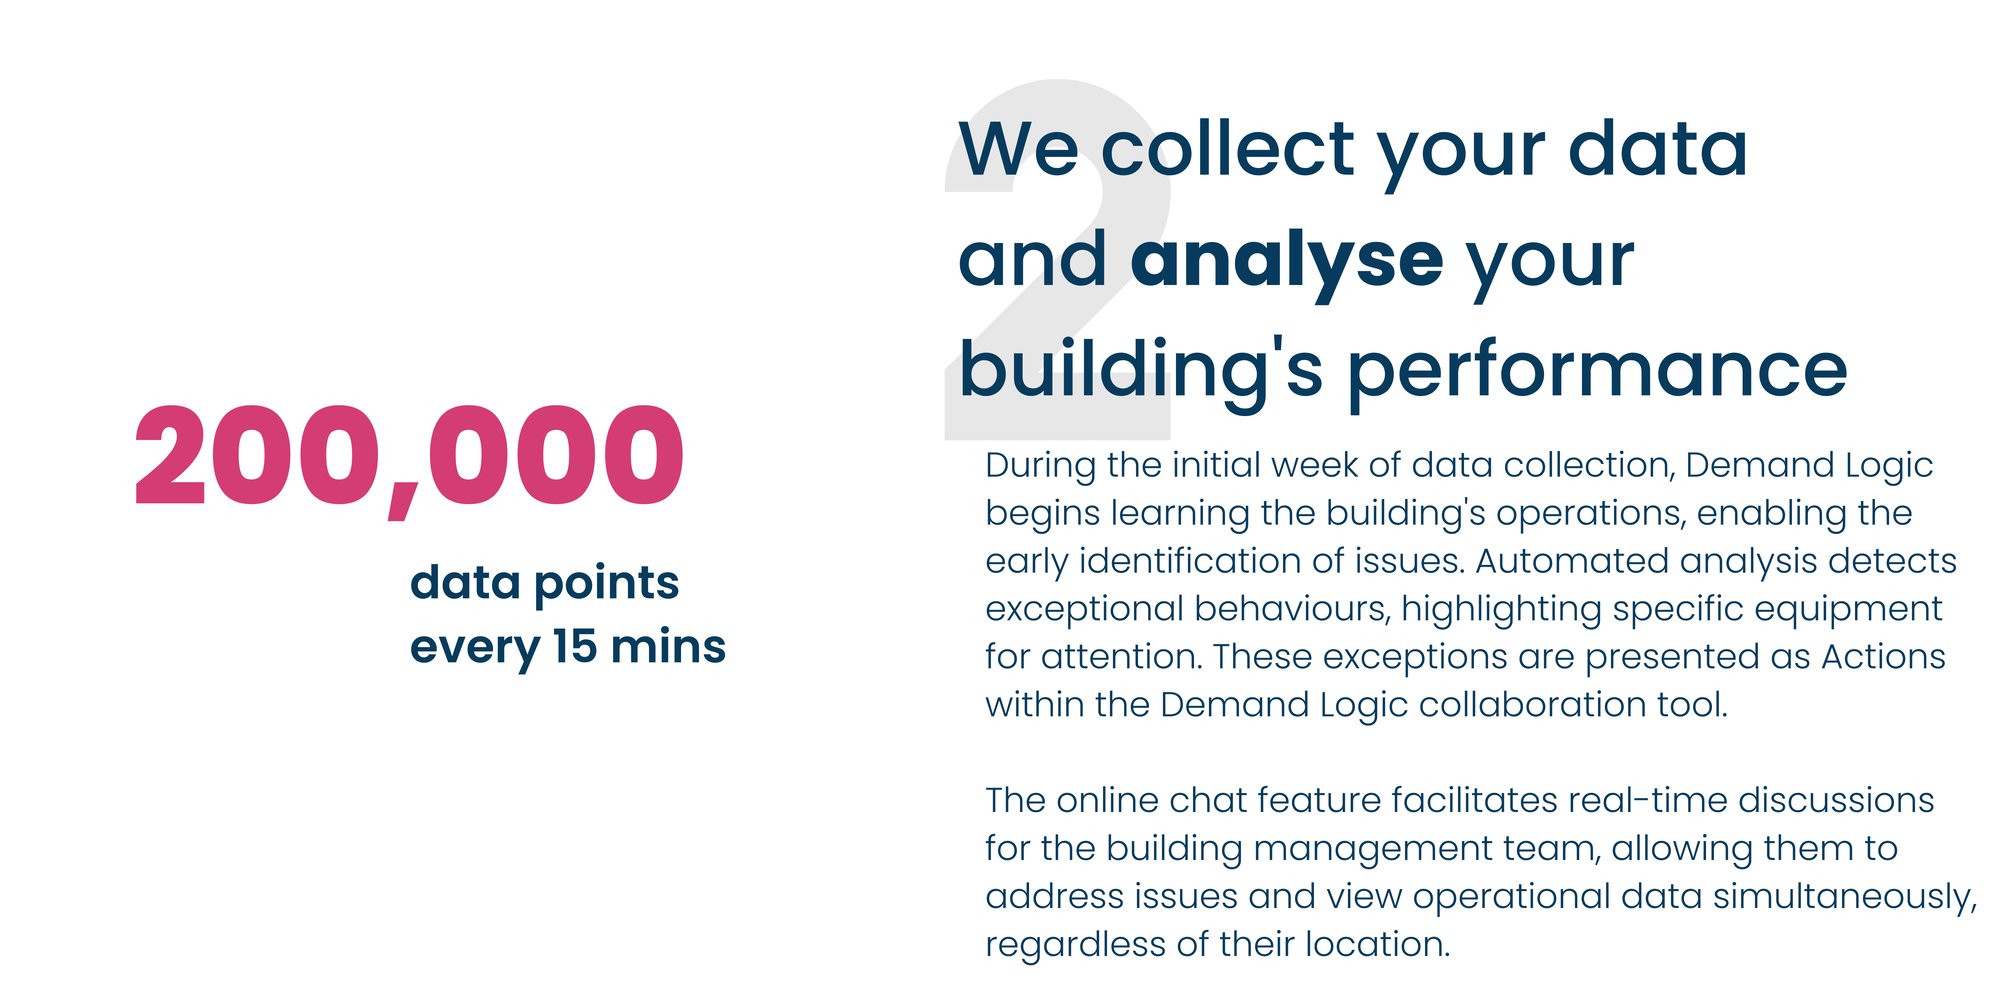 We collect your data and analyse your building's performance